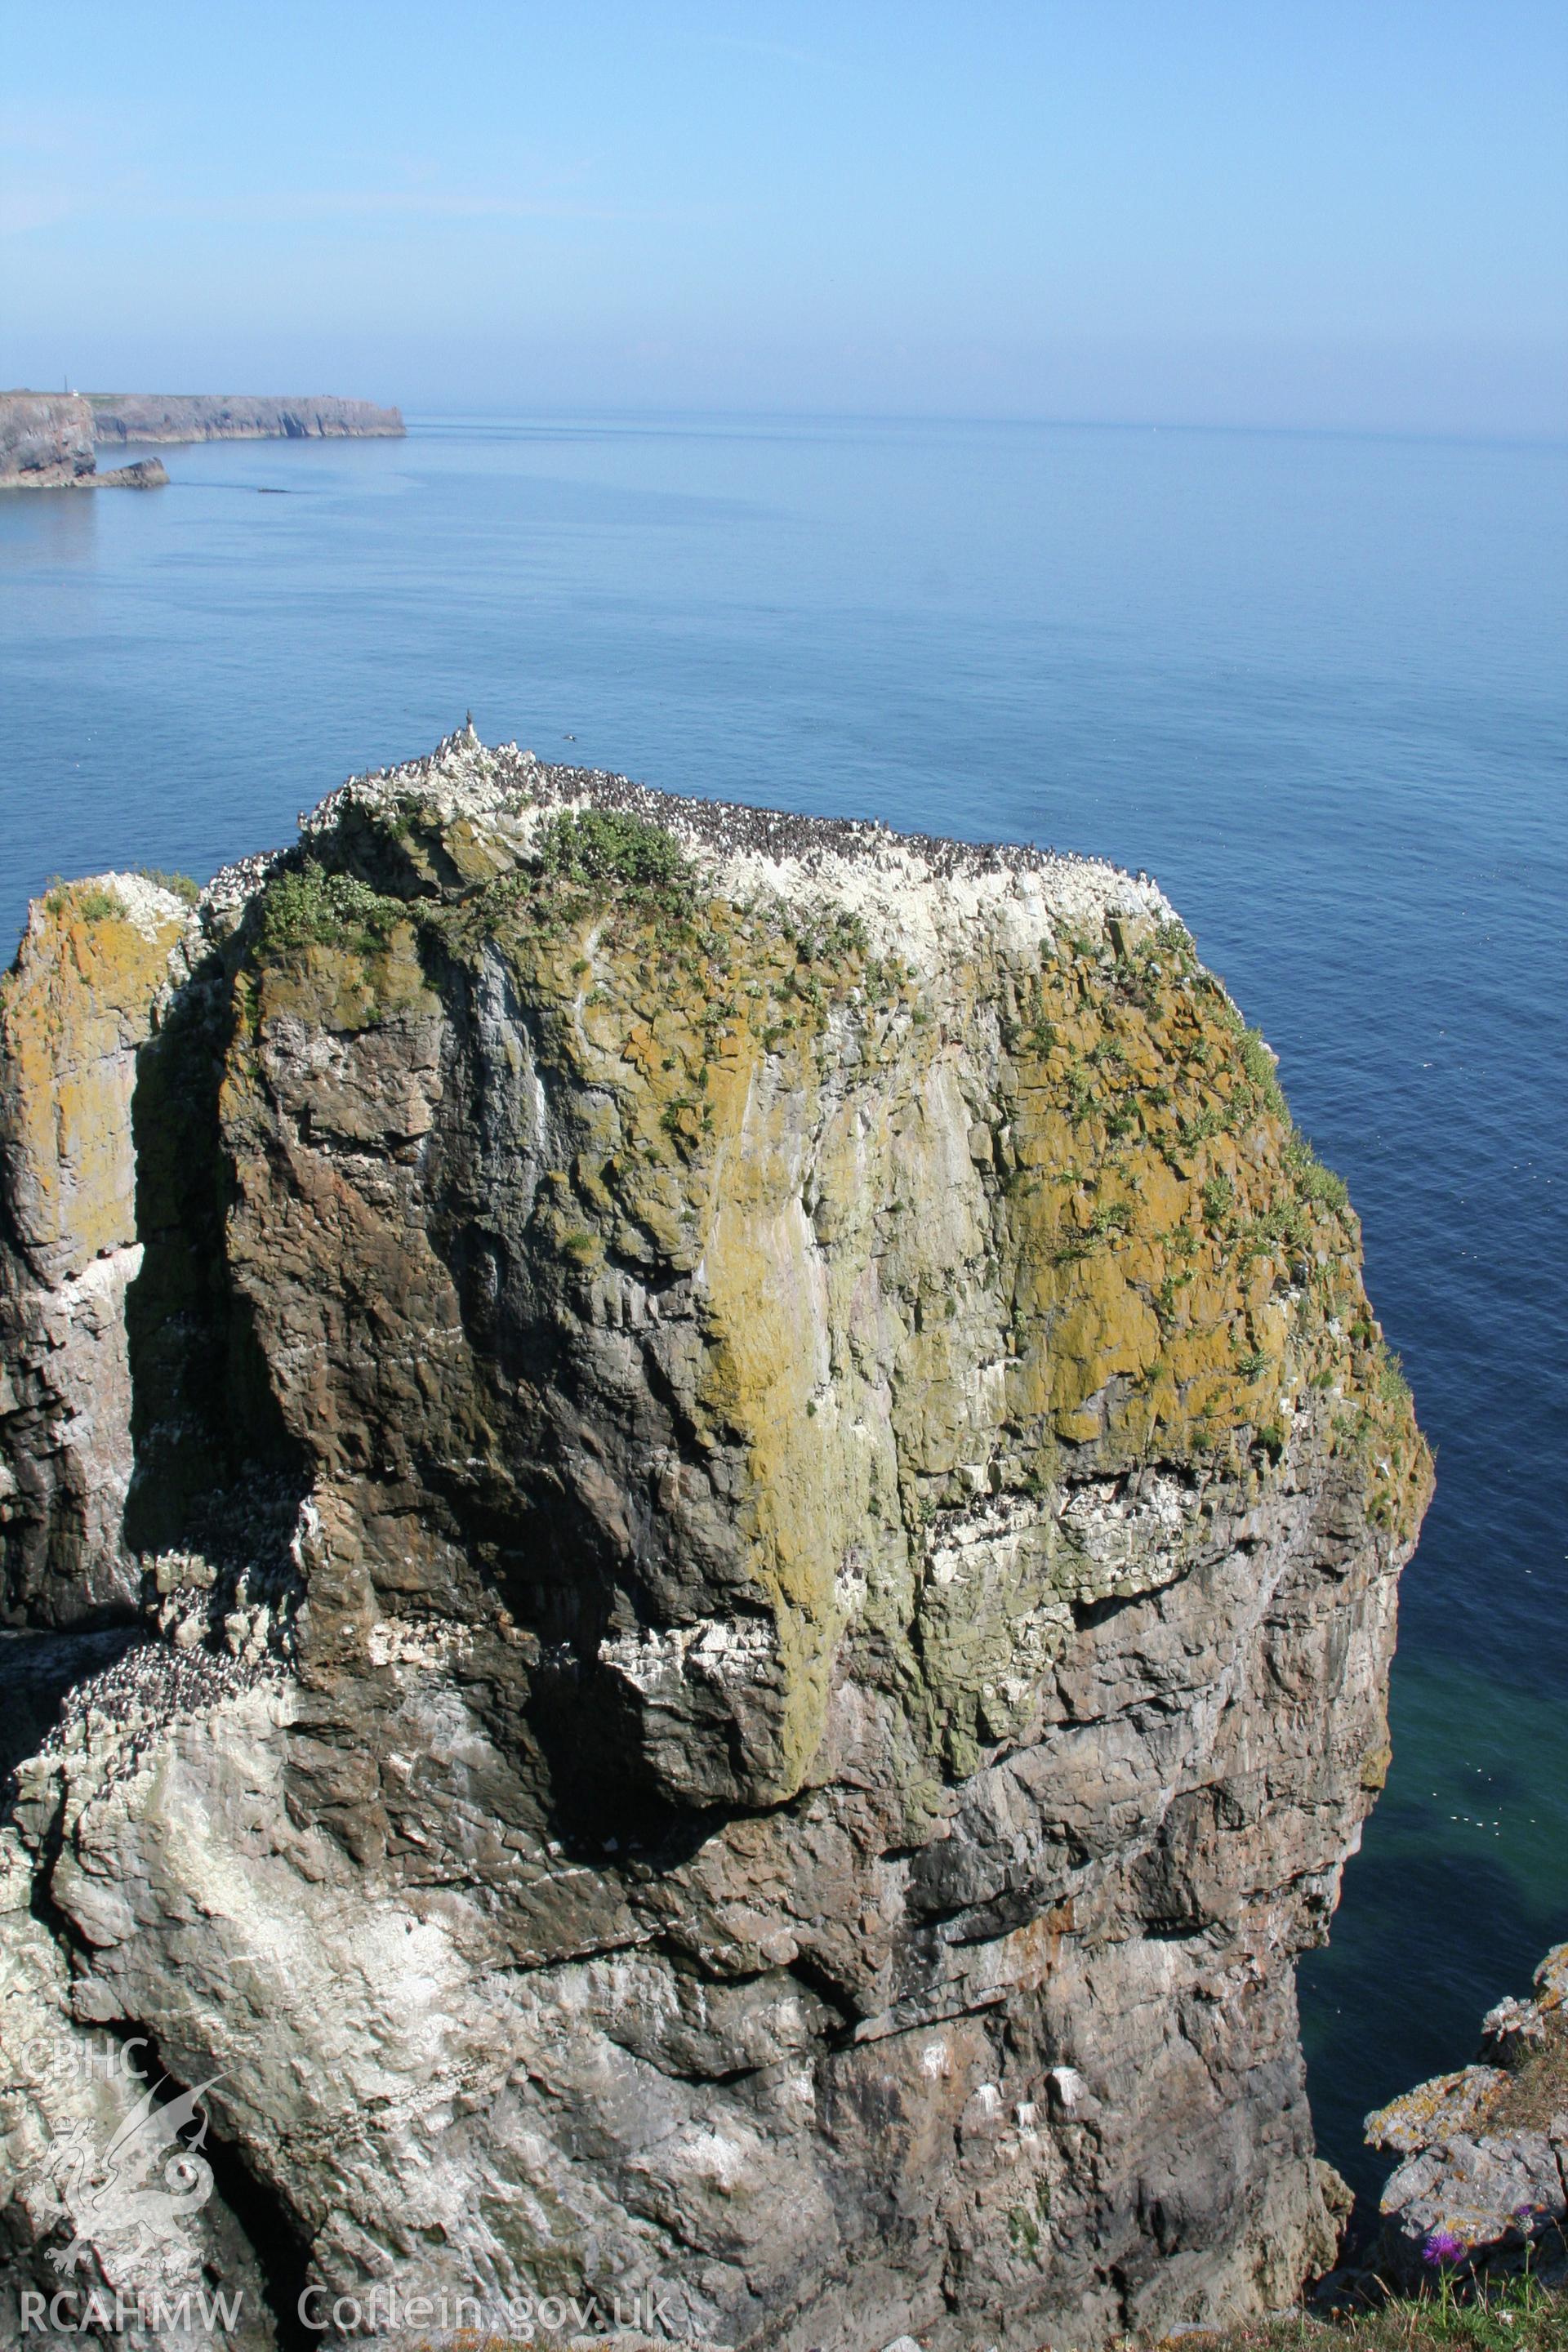 Elegug Stacks with nesting birds, from the north-west.